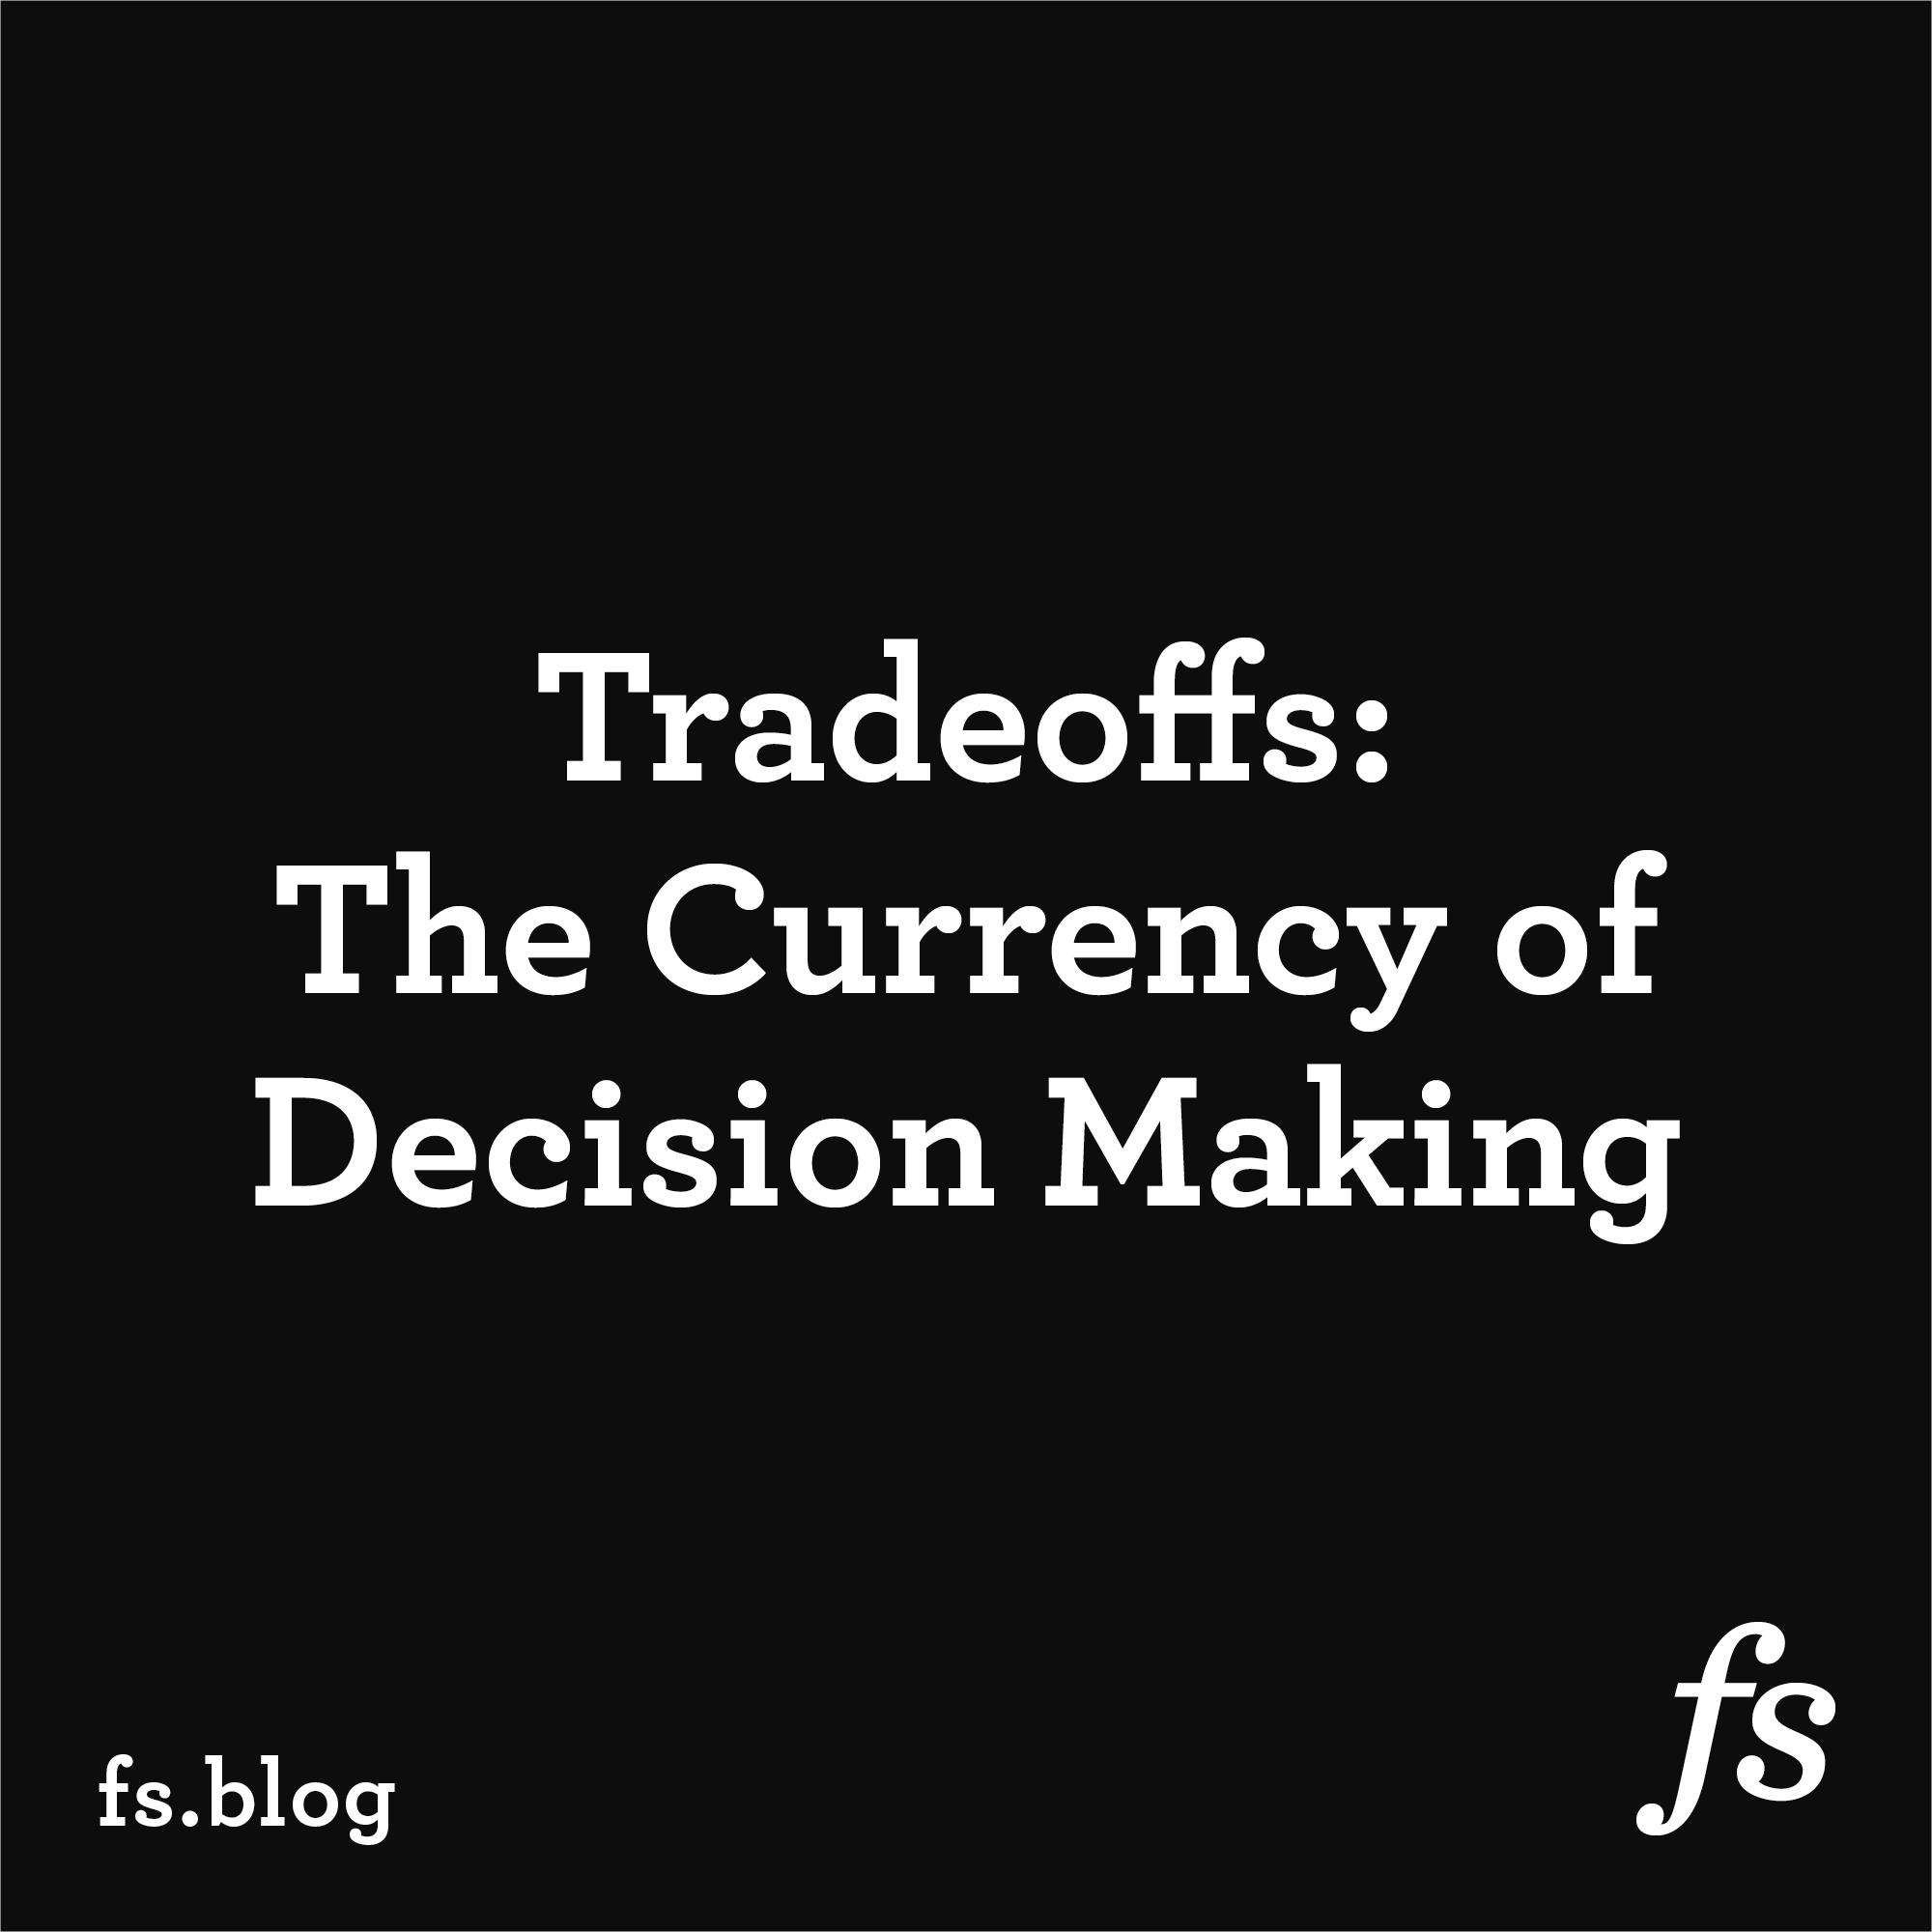 Tradeoffs: The Currency of Decision Making